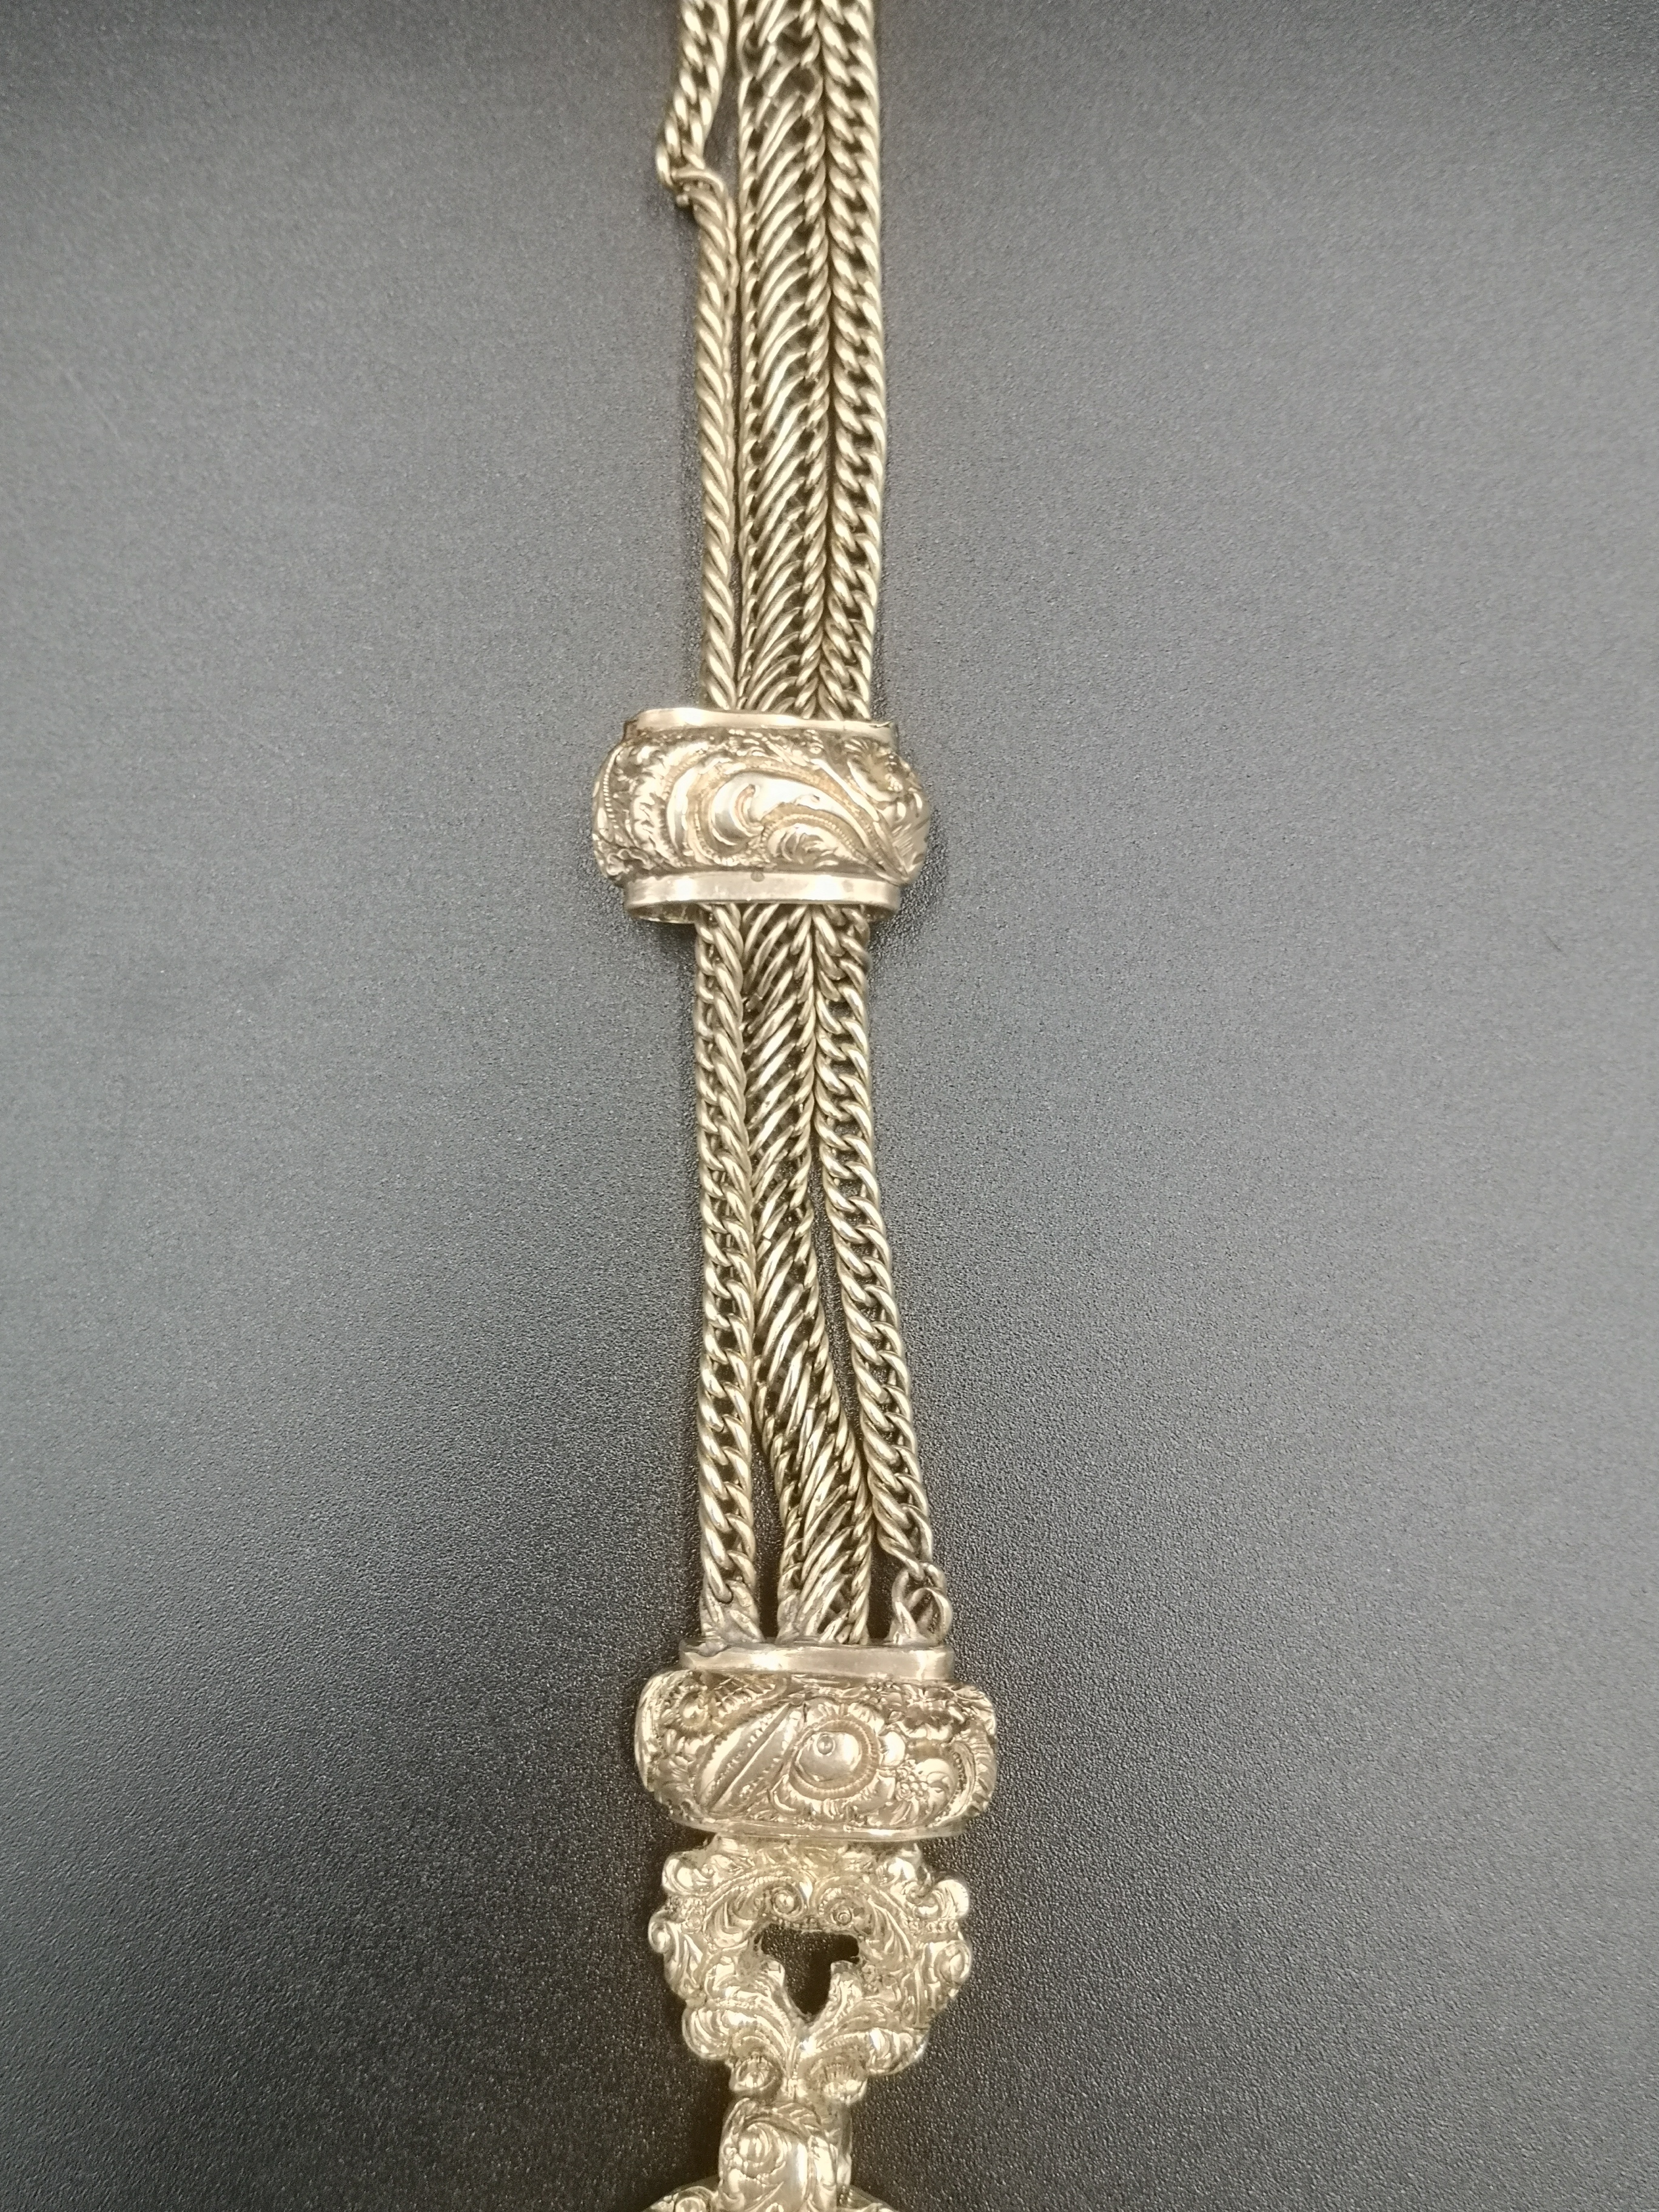 Gold fob chain with two seals - Image 7 of 8